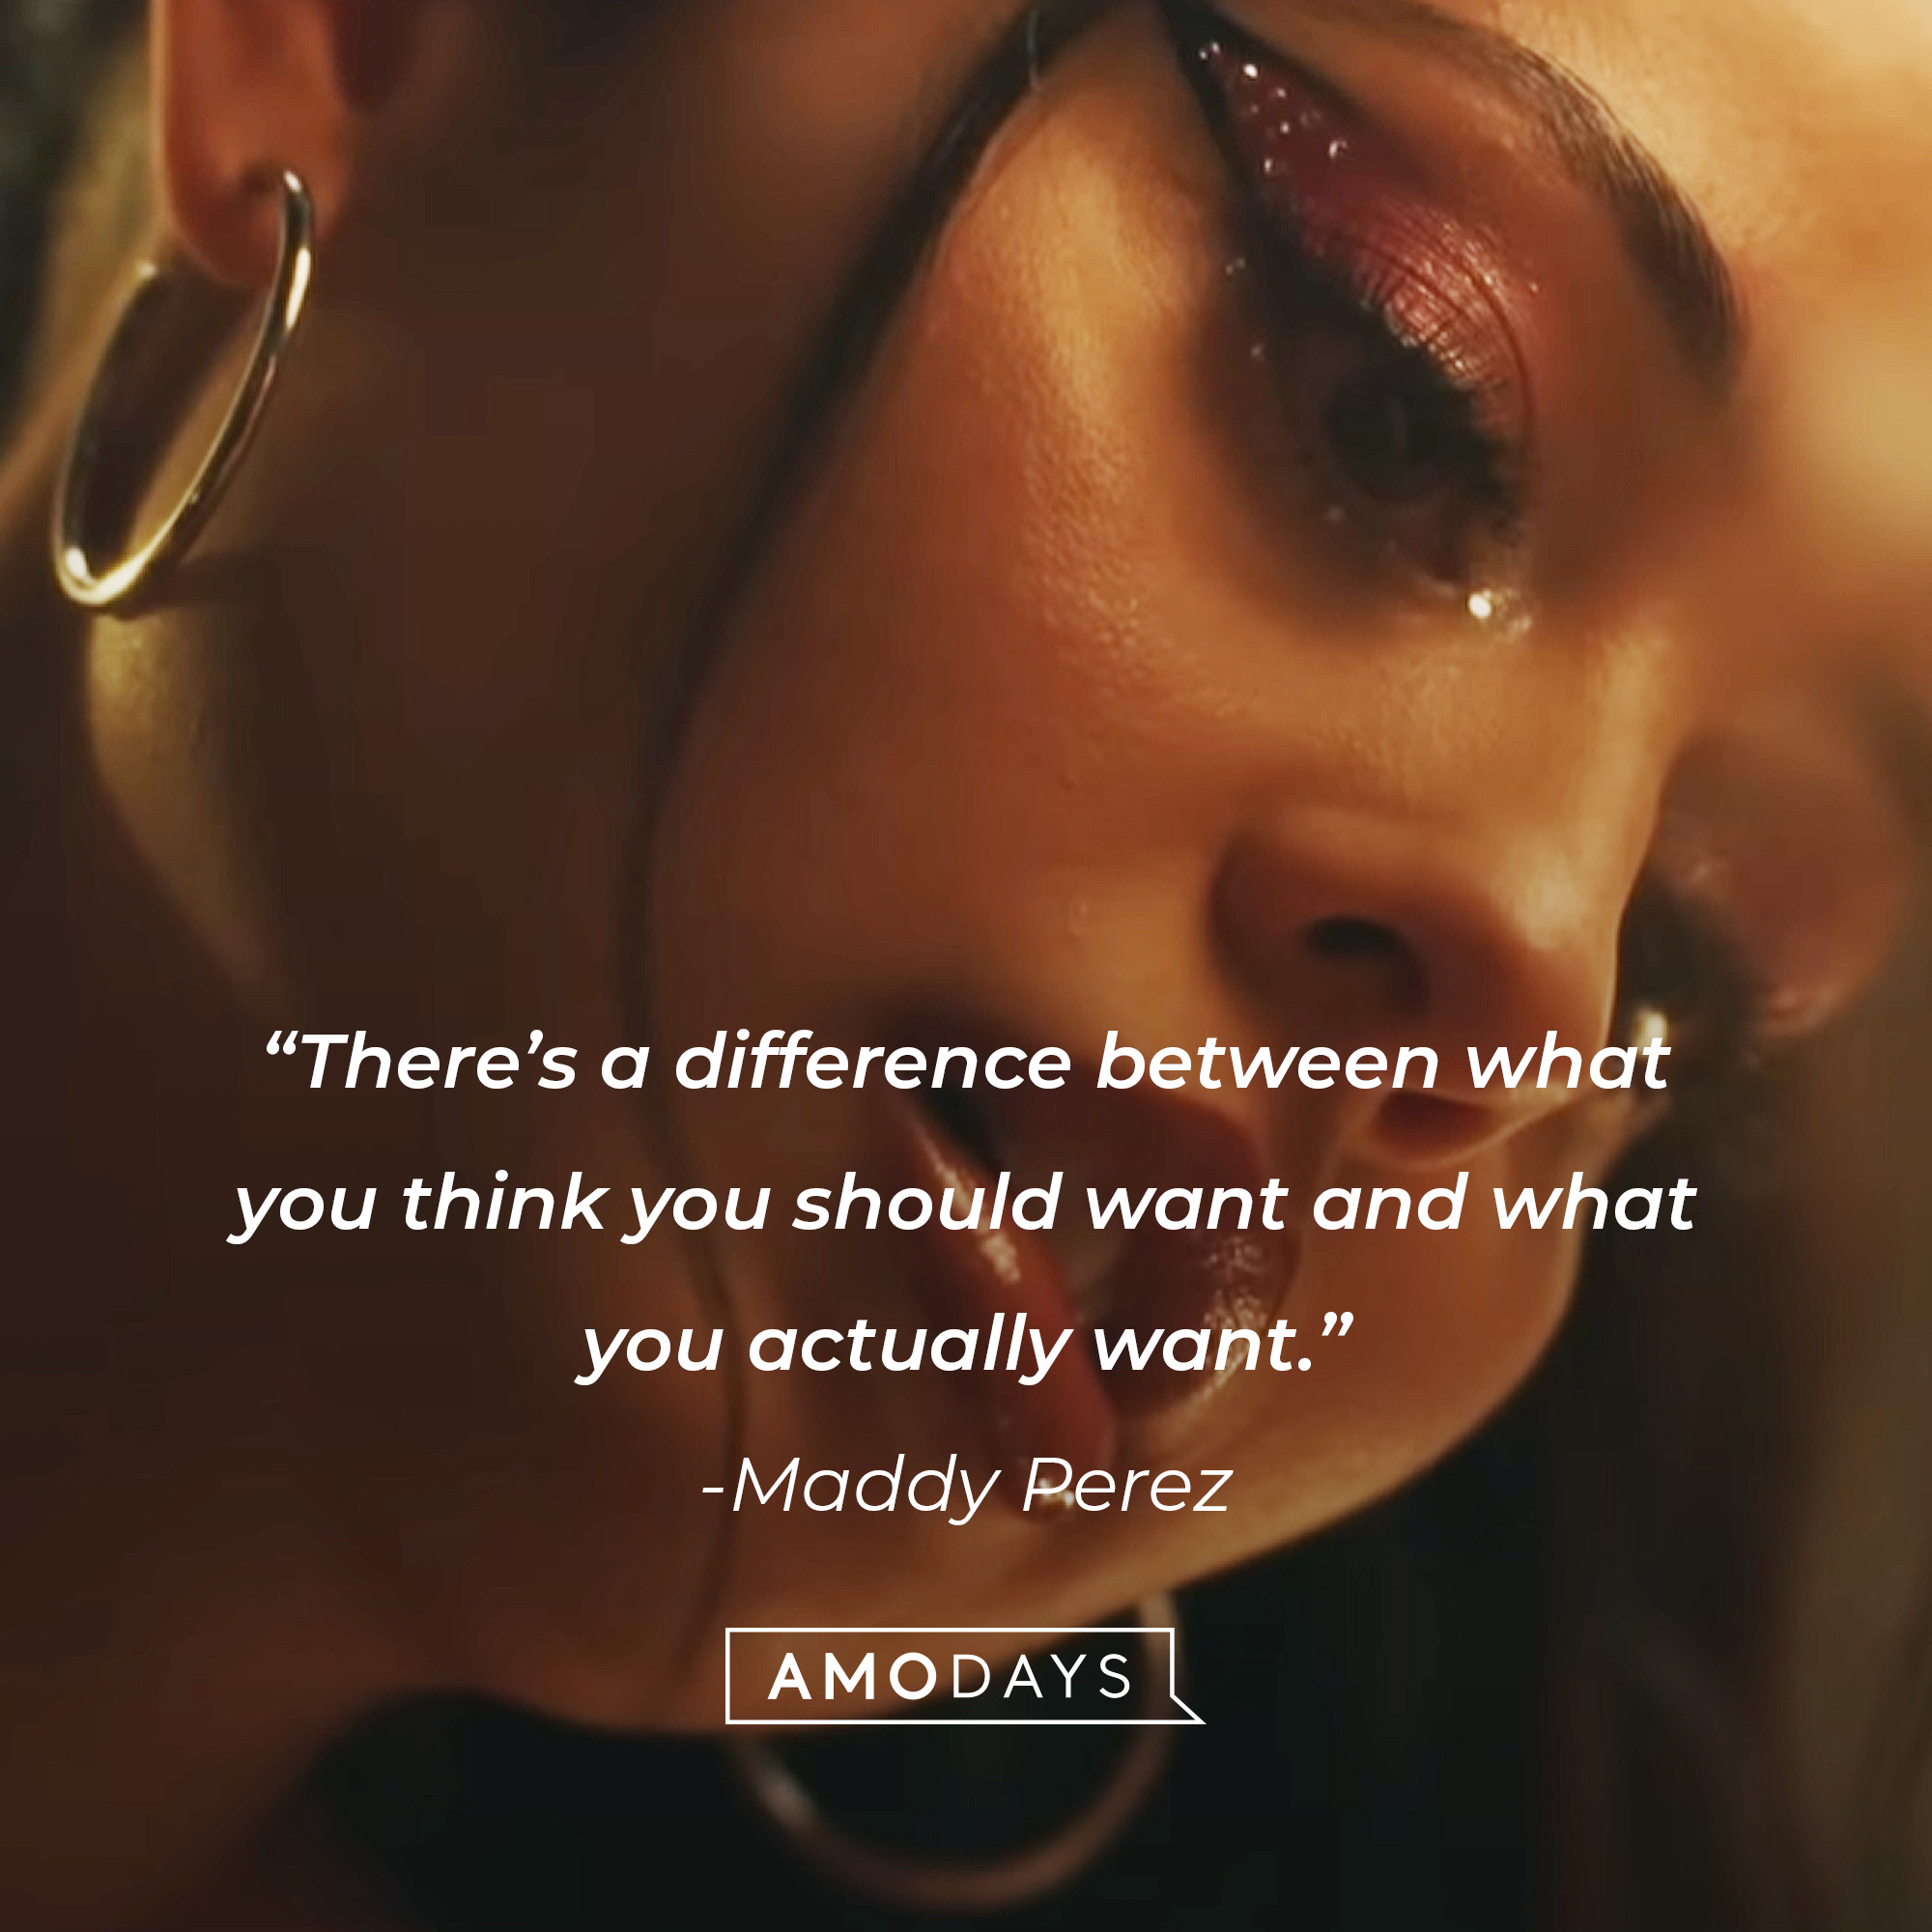 An image of Maddy Perez,  with her quote: “There’s a difference between what you think you should want and what you actually want.” | Source: HBO